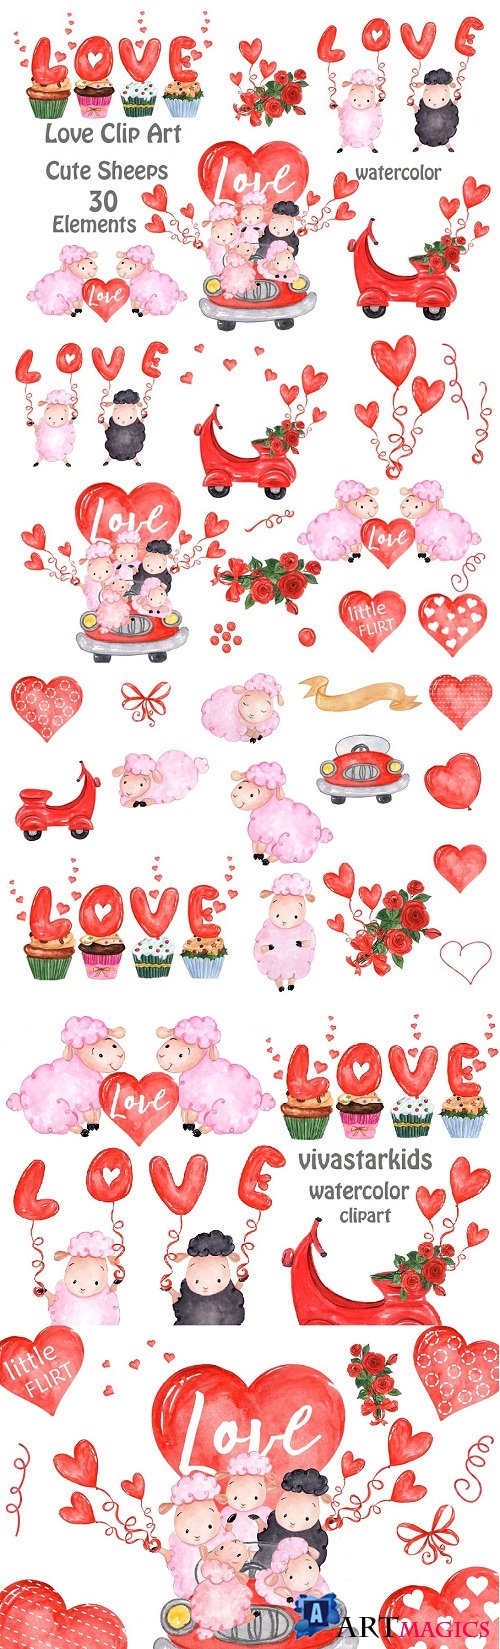 Valentine's Day Cute sheep clipart - 2183619